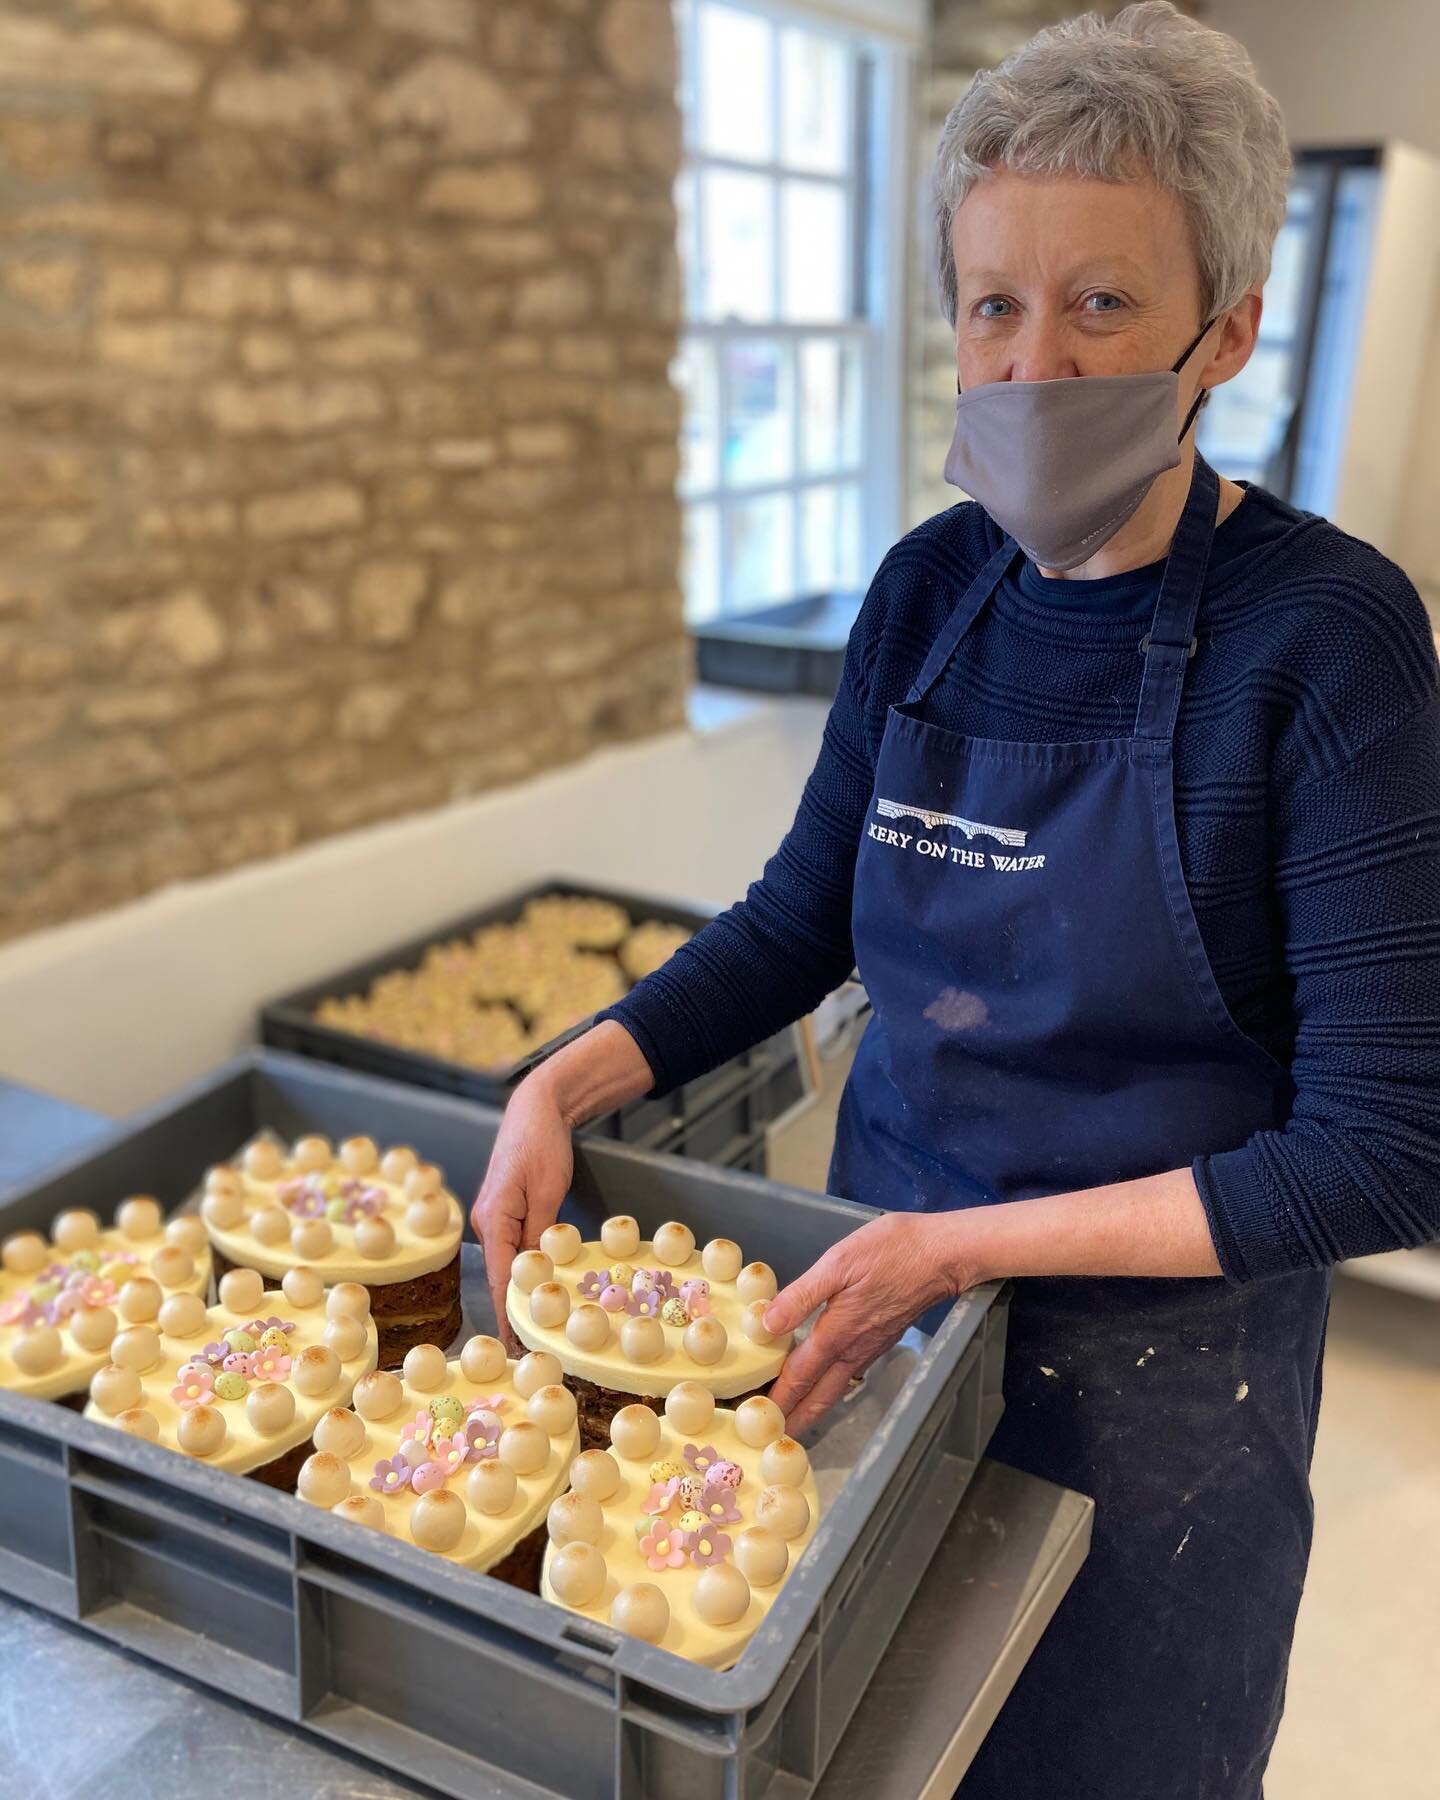 Spring has Sprung and that means Simnel Cakes 🌼💛
.
Can you believe it&rsquo;s March again? What a year it had been since our last batch of Simnel Cakes - but once again, Clare is happy to be back on her favourite bake of the year, over in Bourton @